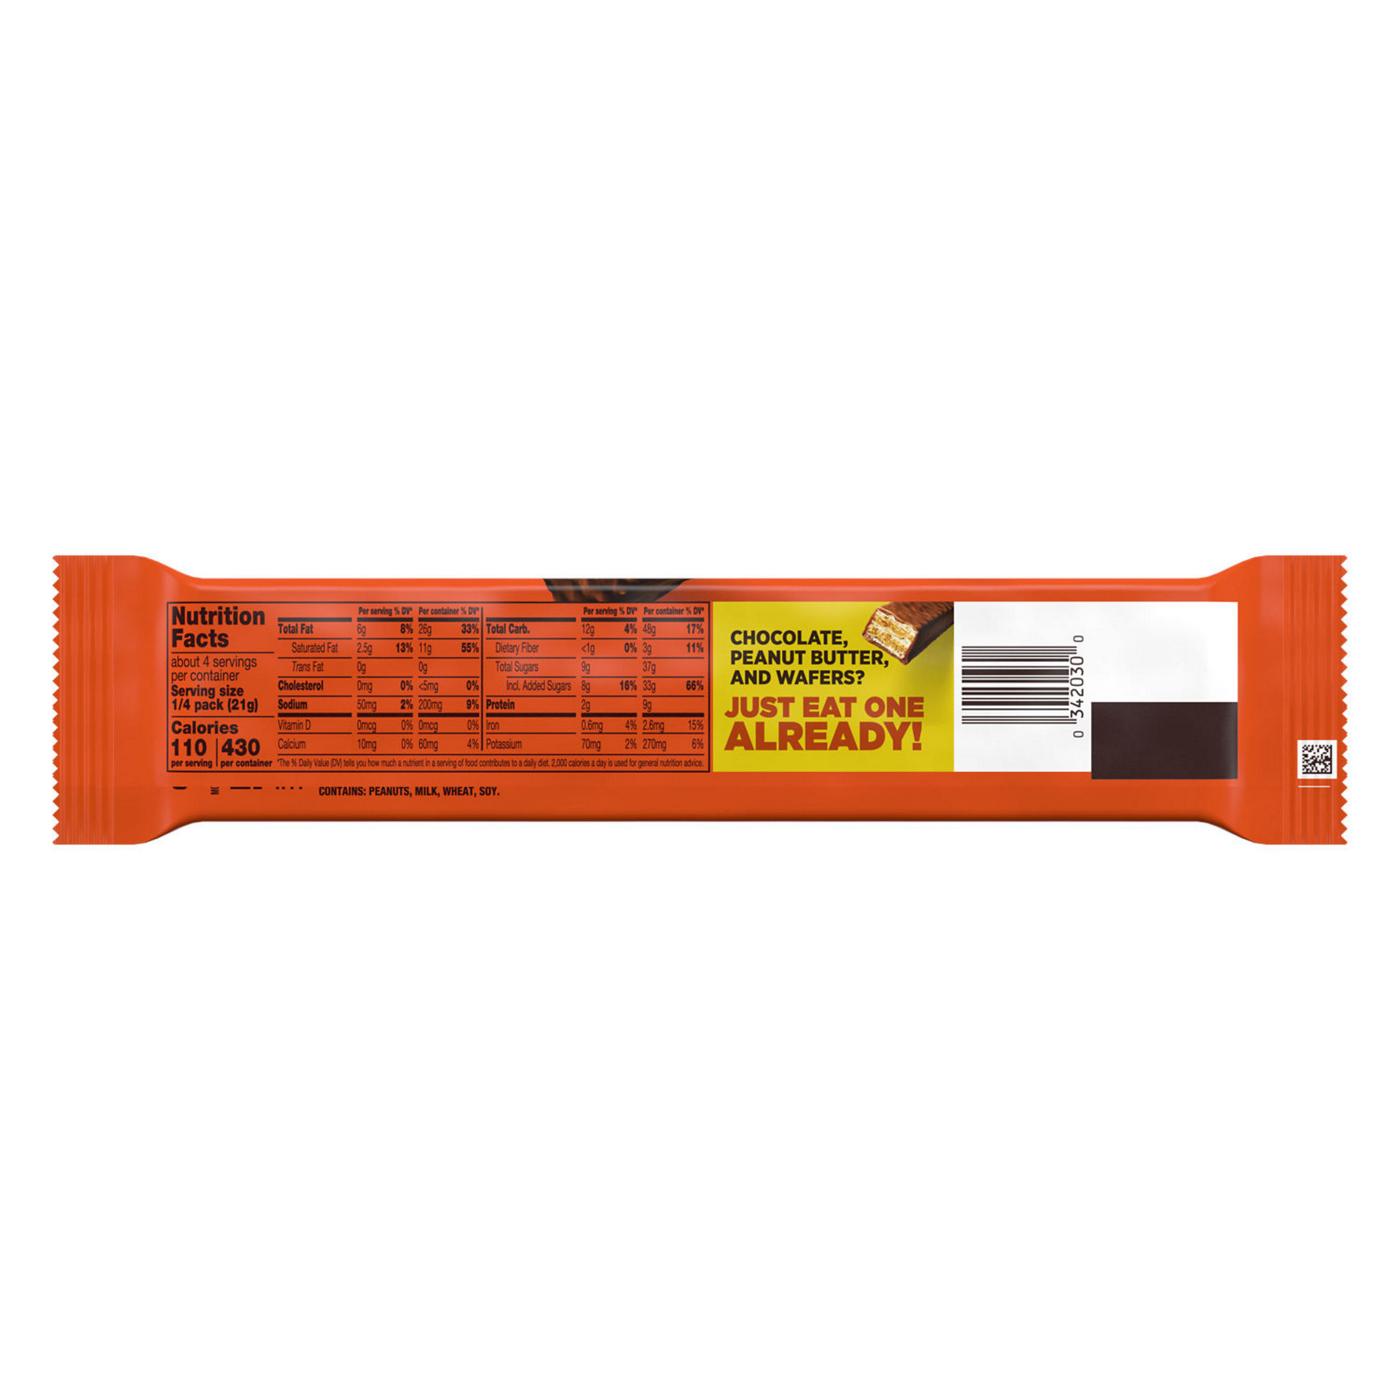 Reese's Sticks Milk Chocolate Peanut Butter Wafer Candy - King Size; image 2 of 7